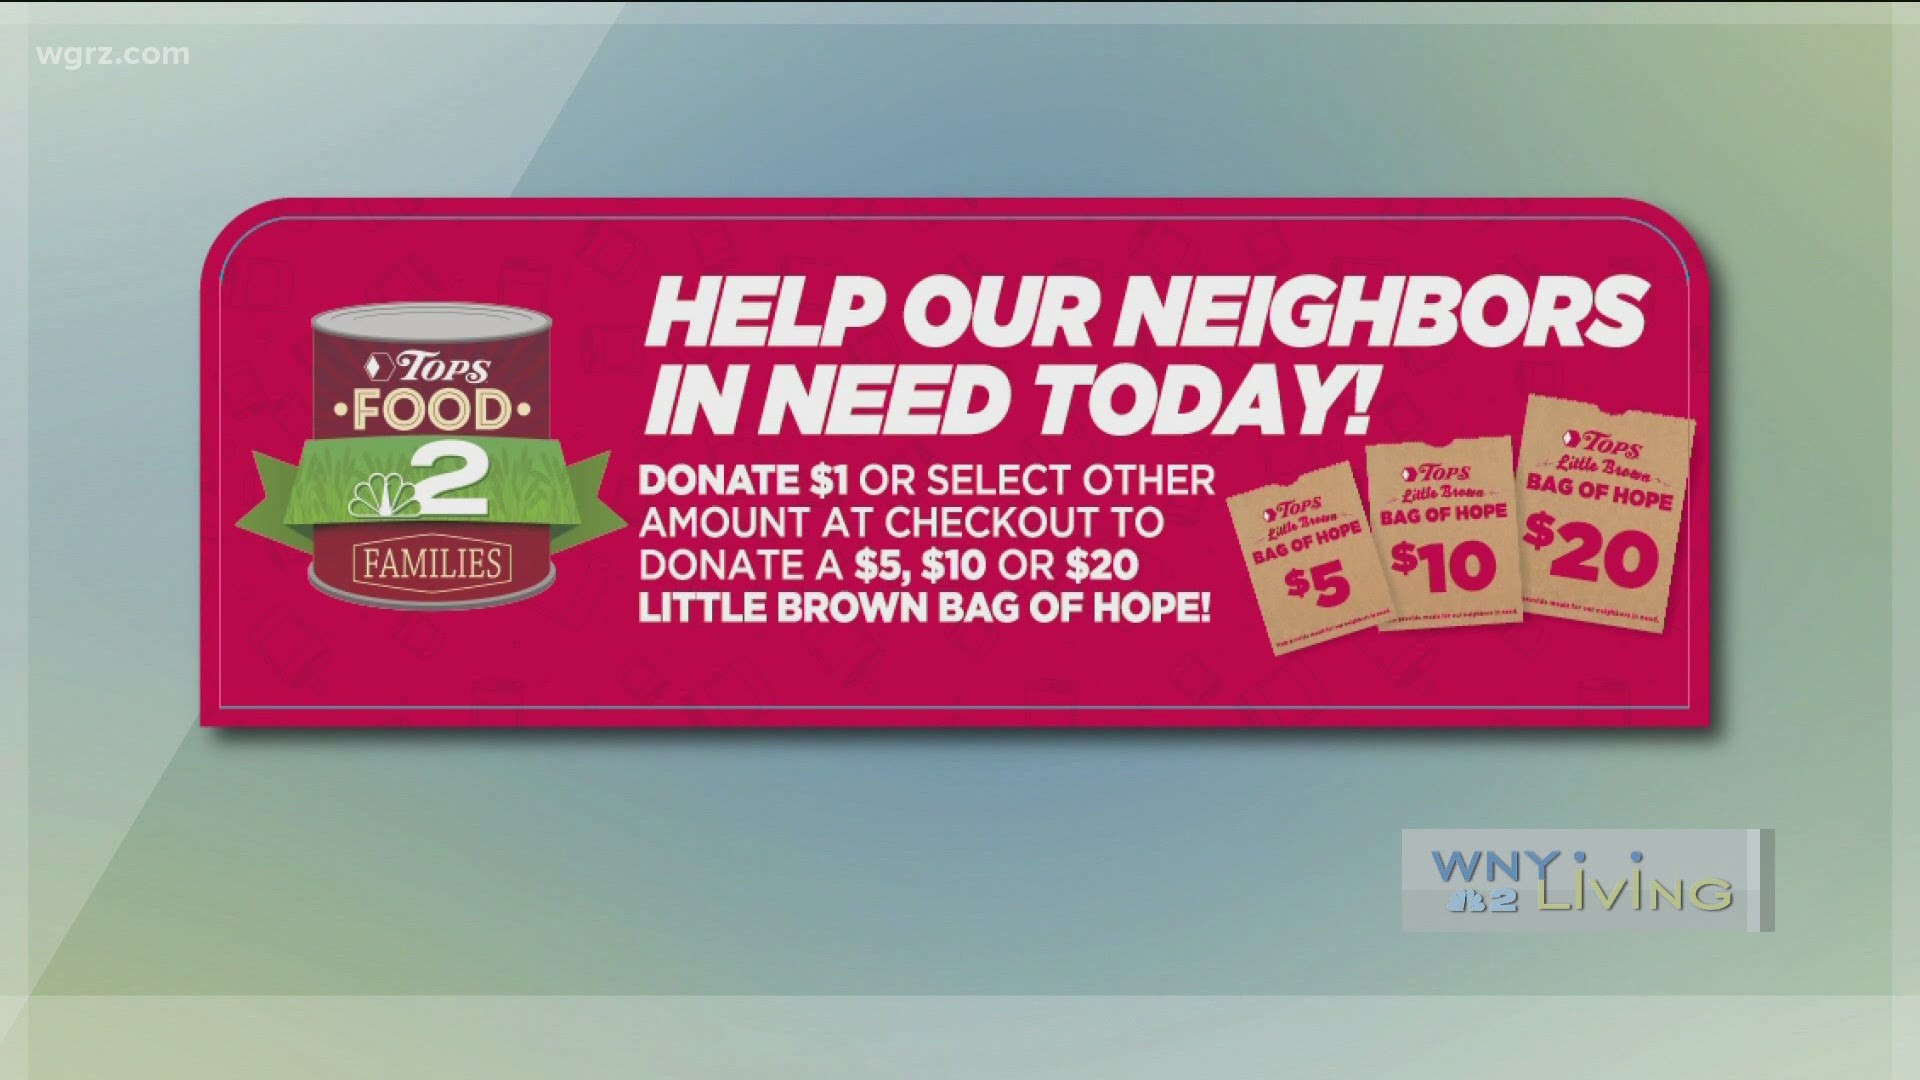 WNY Living - November 28 - Food 2 Families Food & Fund Drive (THIS VIDEO IS SPONSORED BY TOPS FRIENDLY MARKETS)